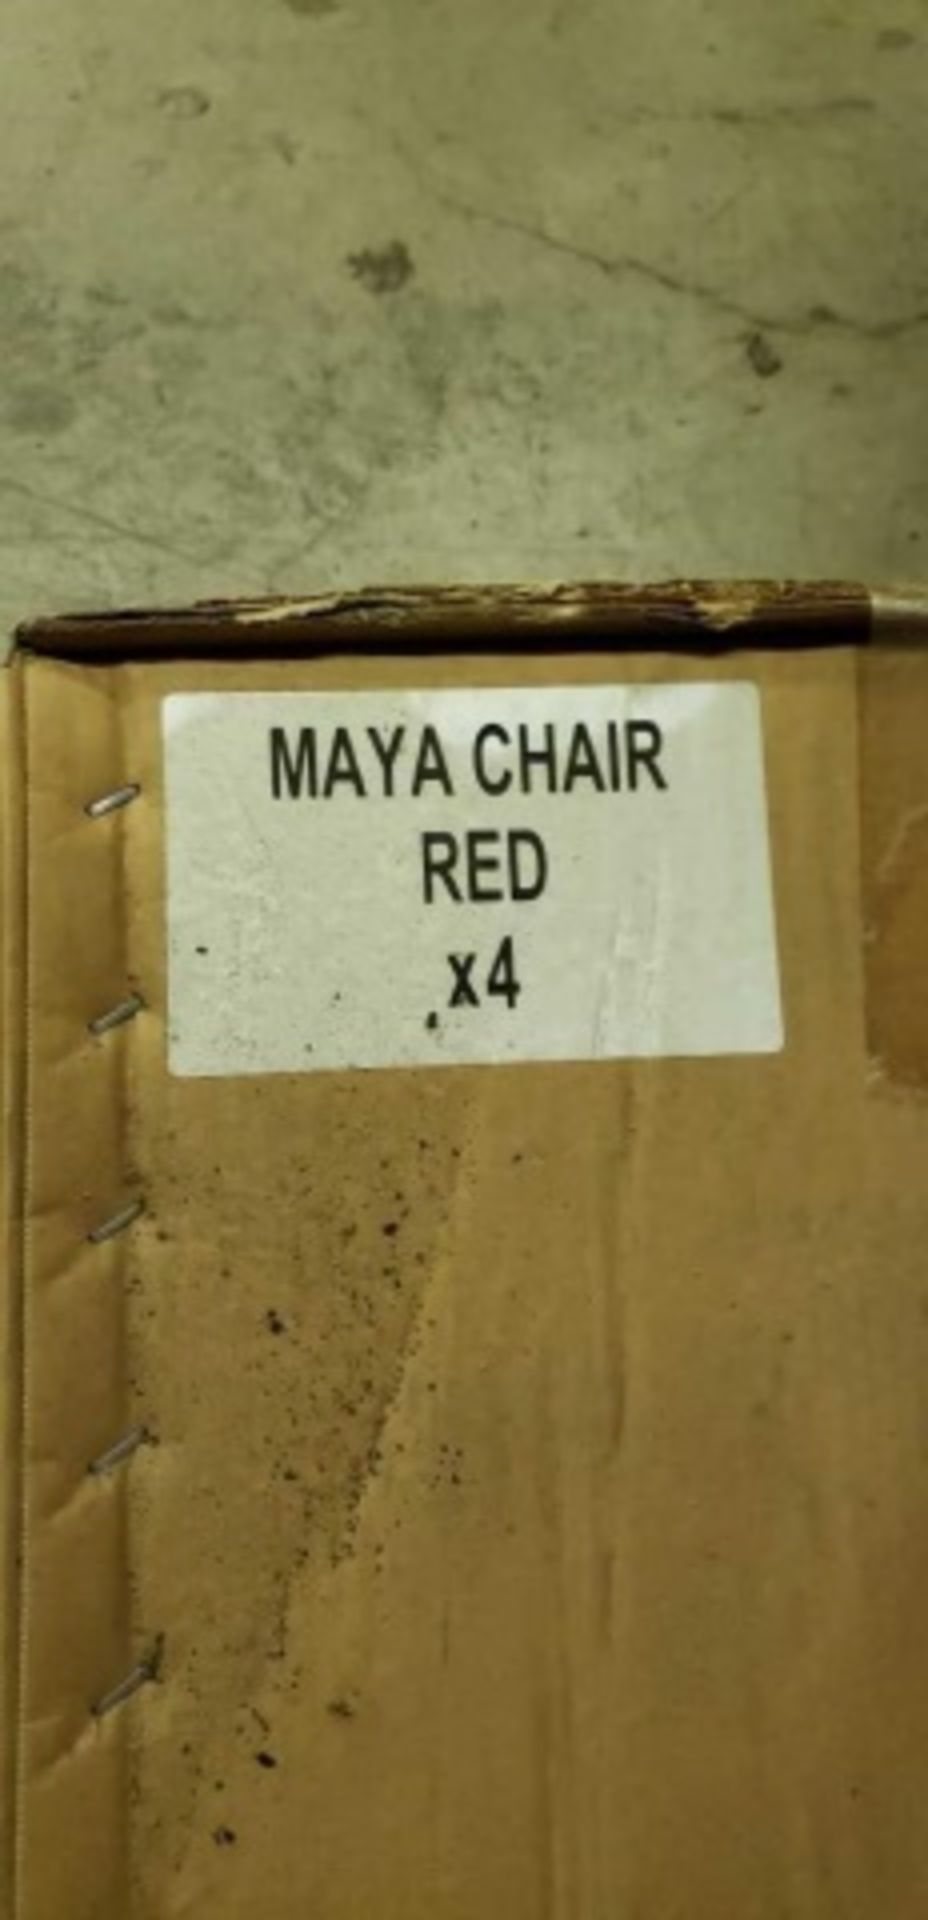 Martinique side chair - red, 8 boxes with 4 each, 32 total. - Image 4 of 5